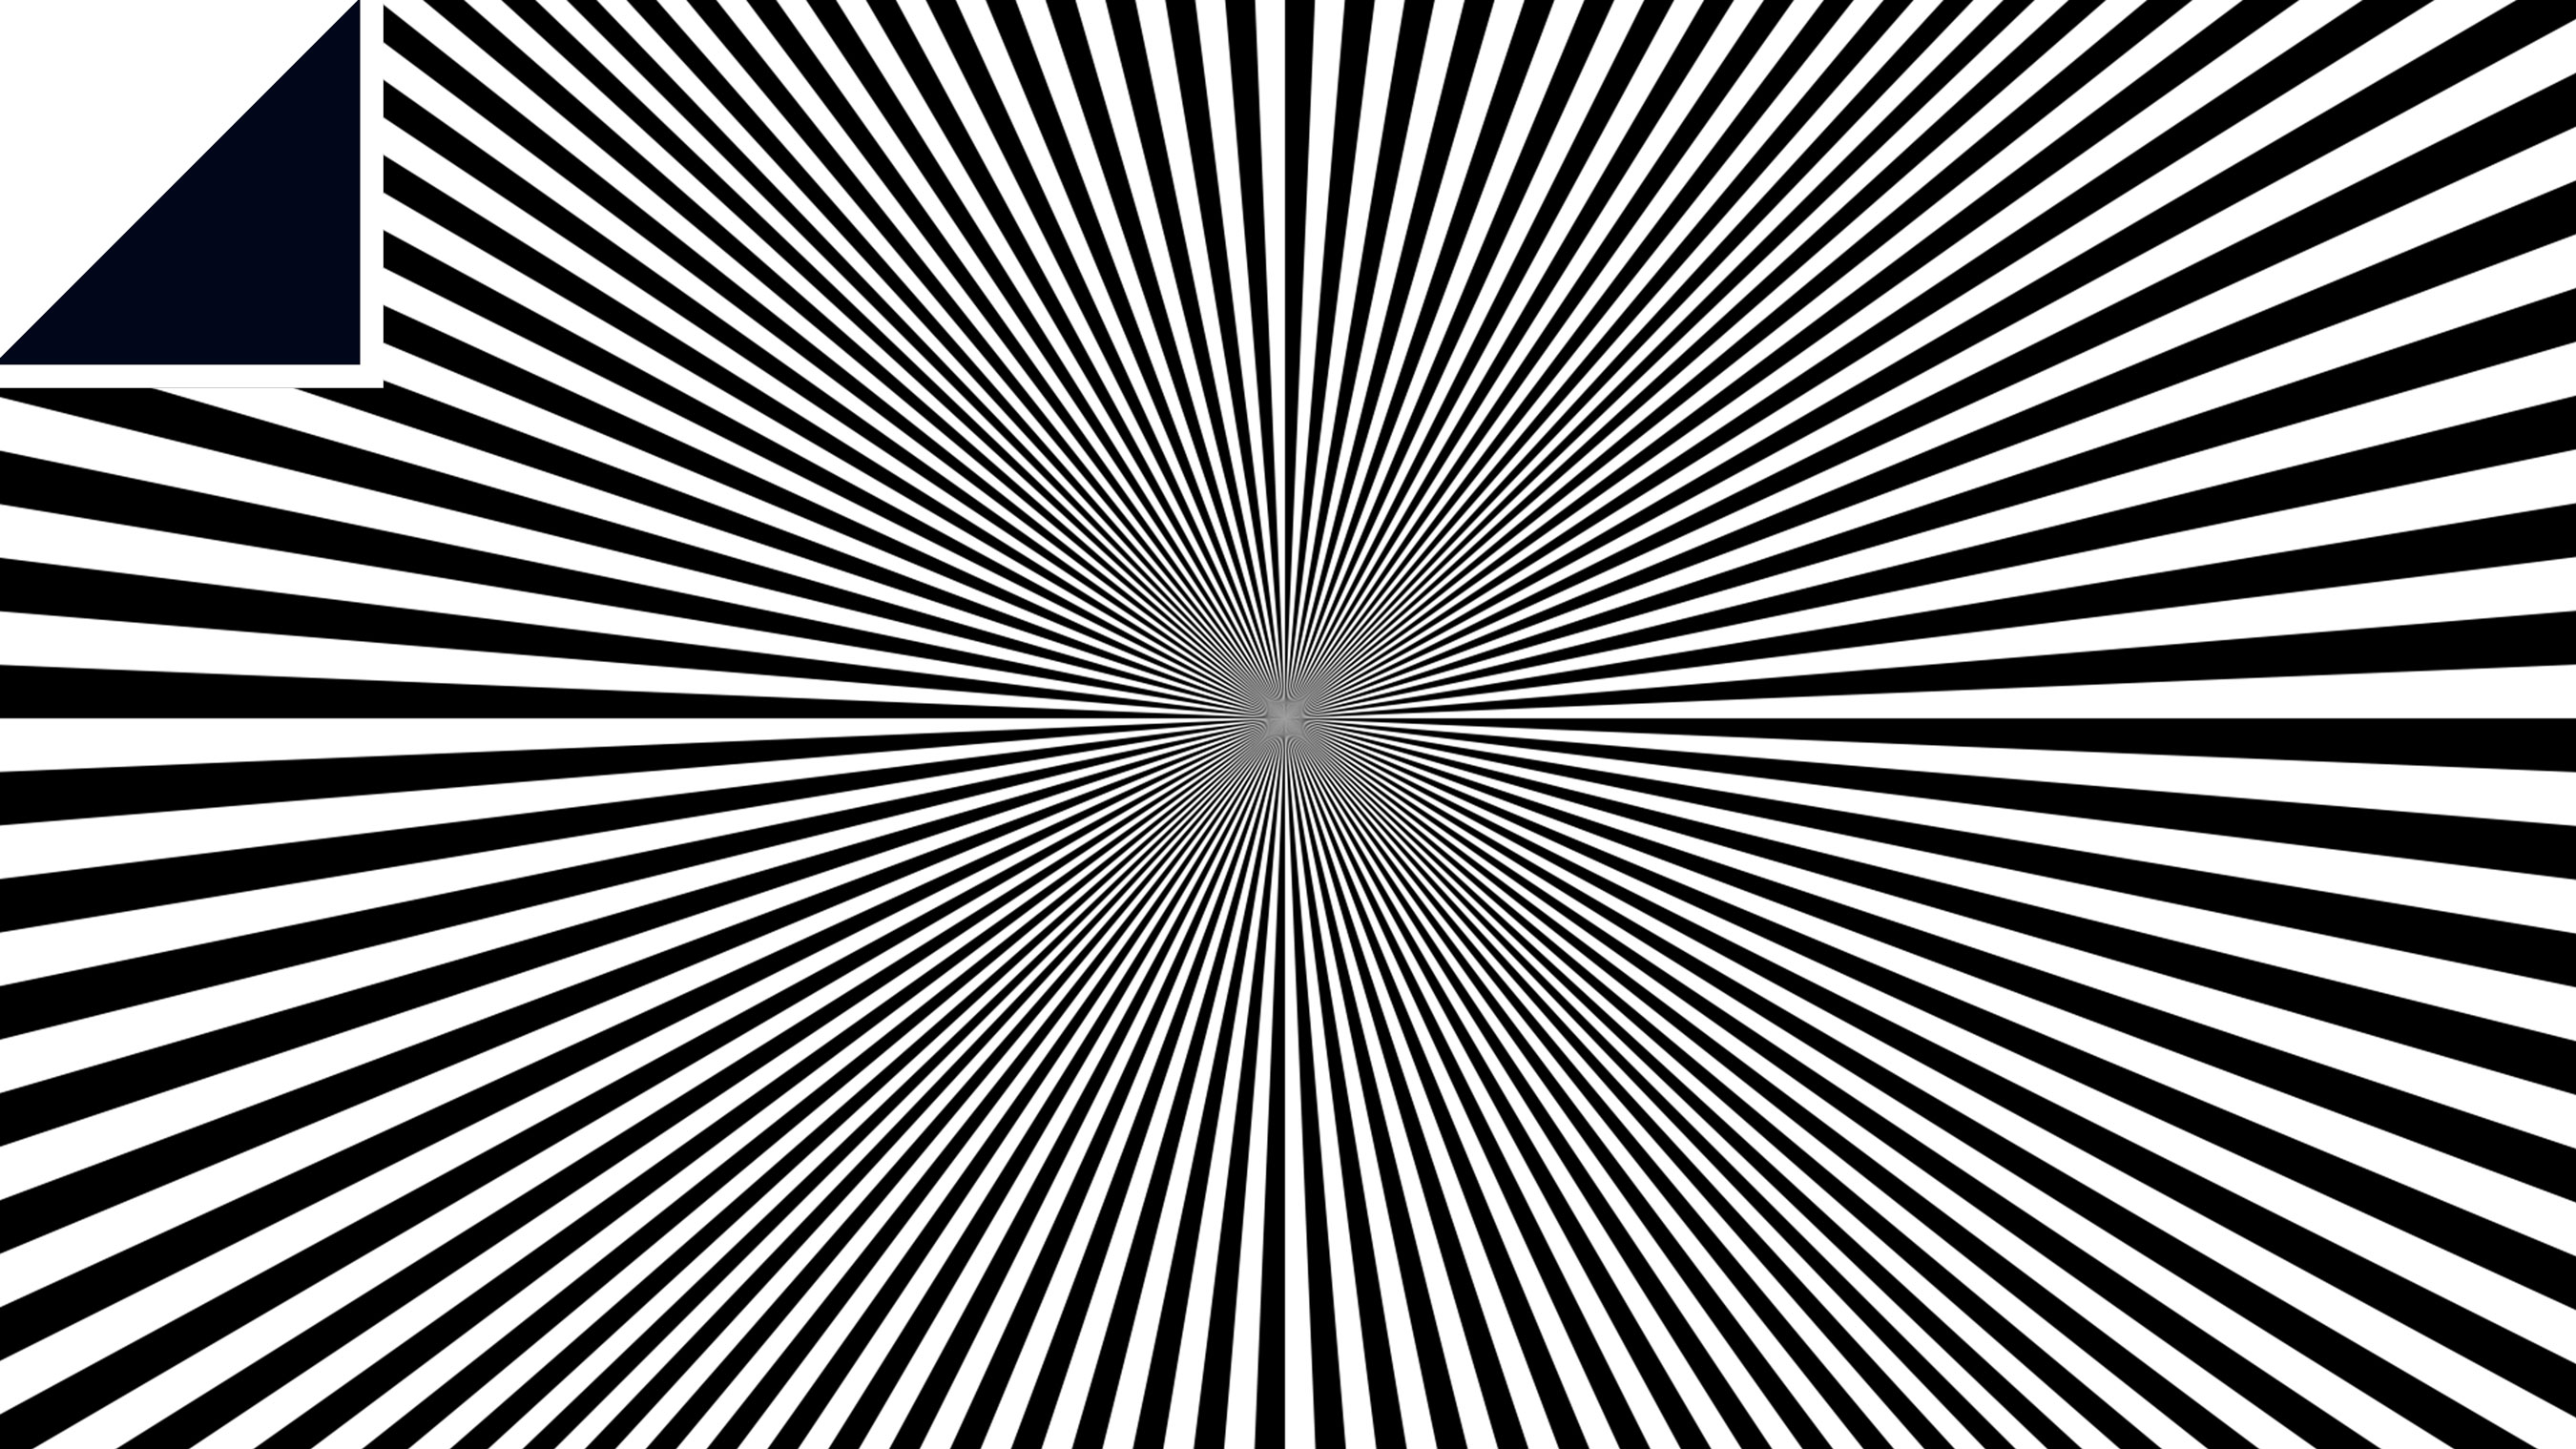 Are Optical Illusions Cultural?, Smart News